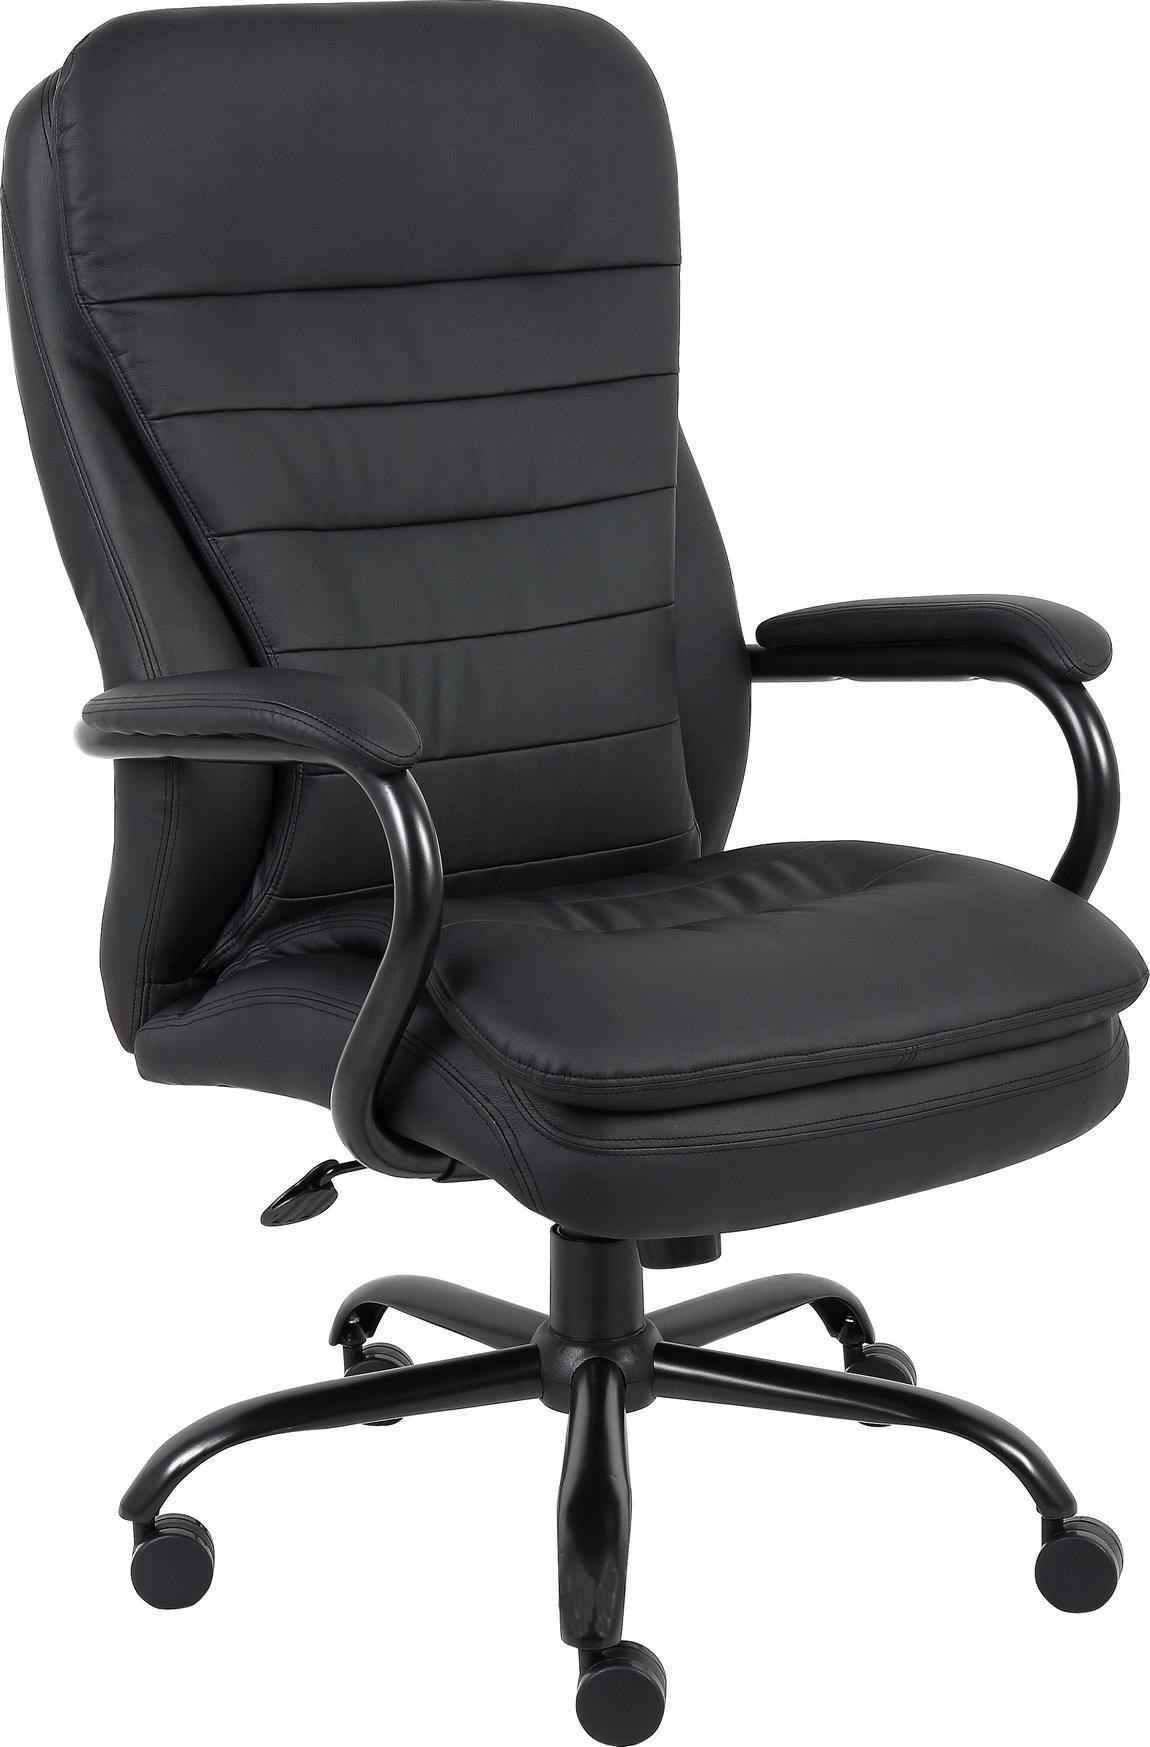 Heavy Weight Office Chair With Black Upholstery